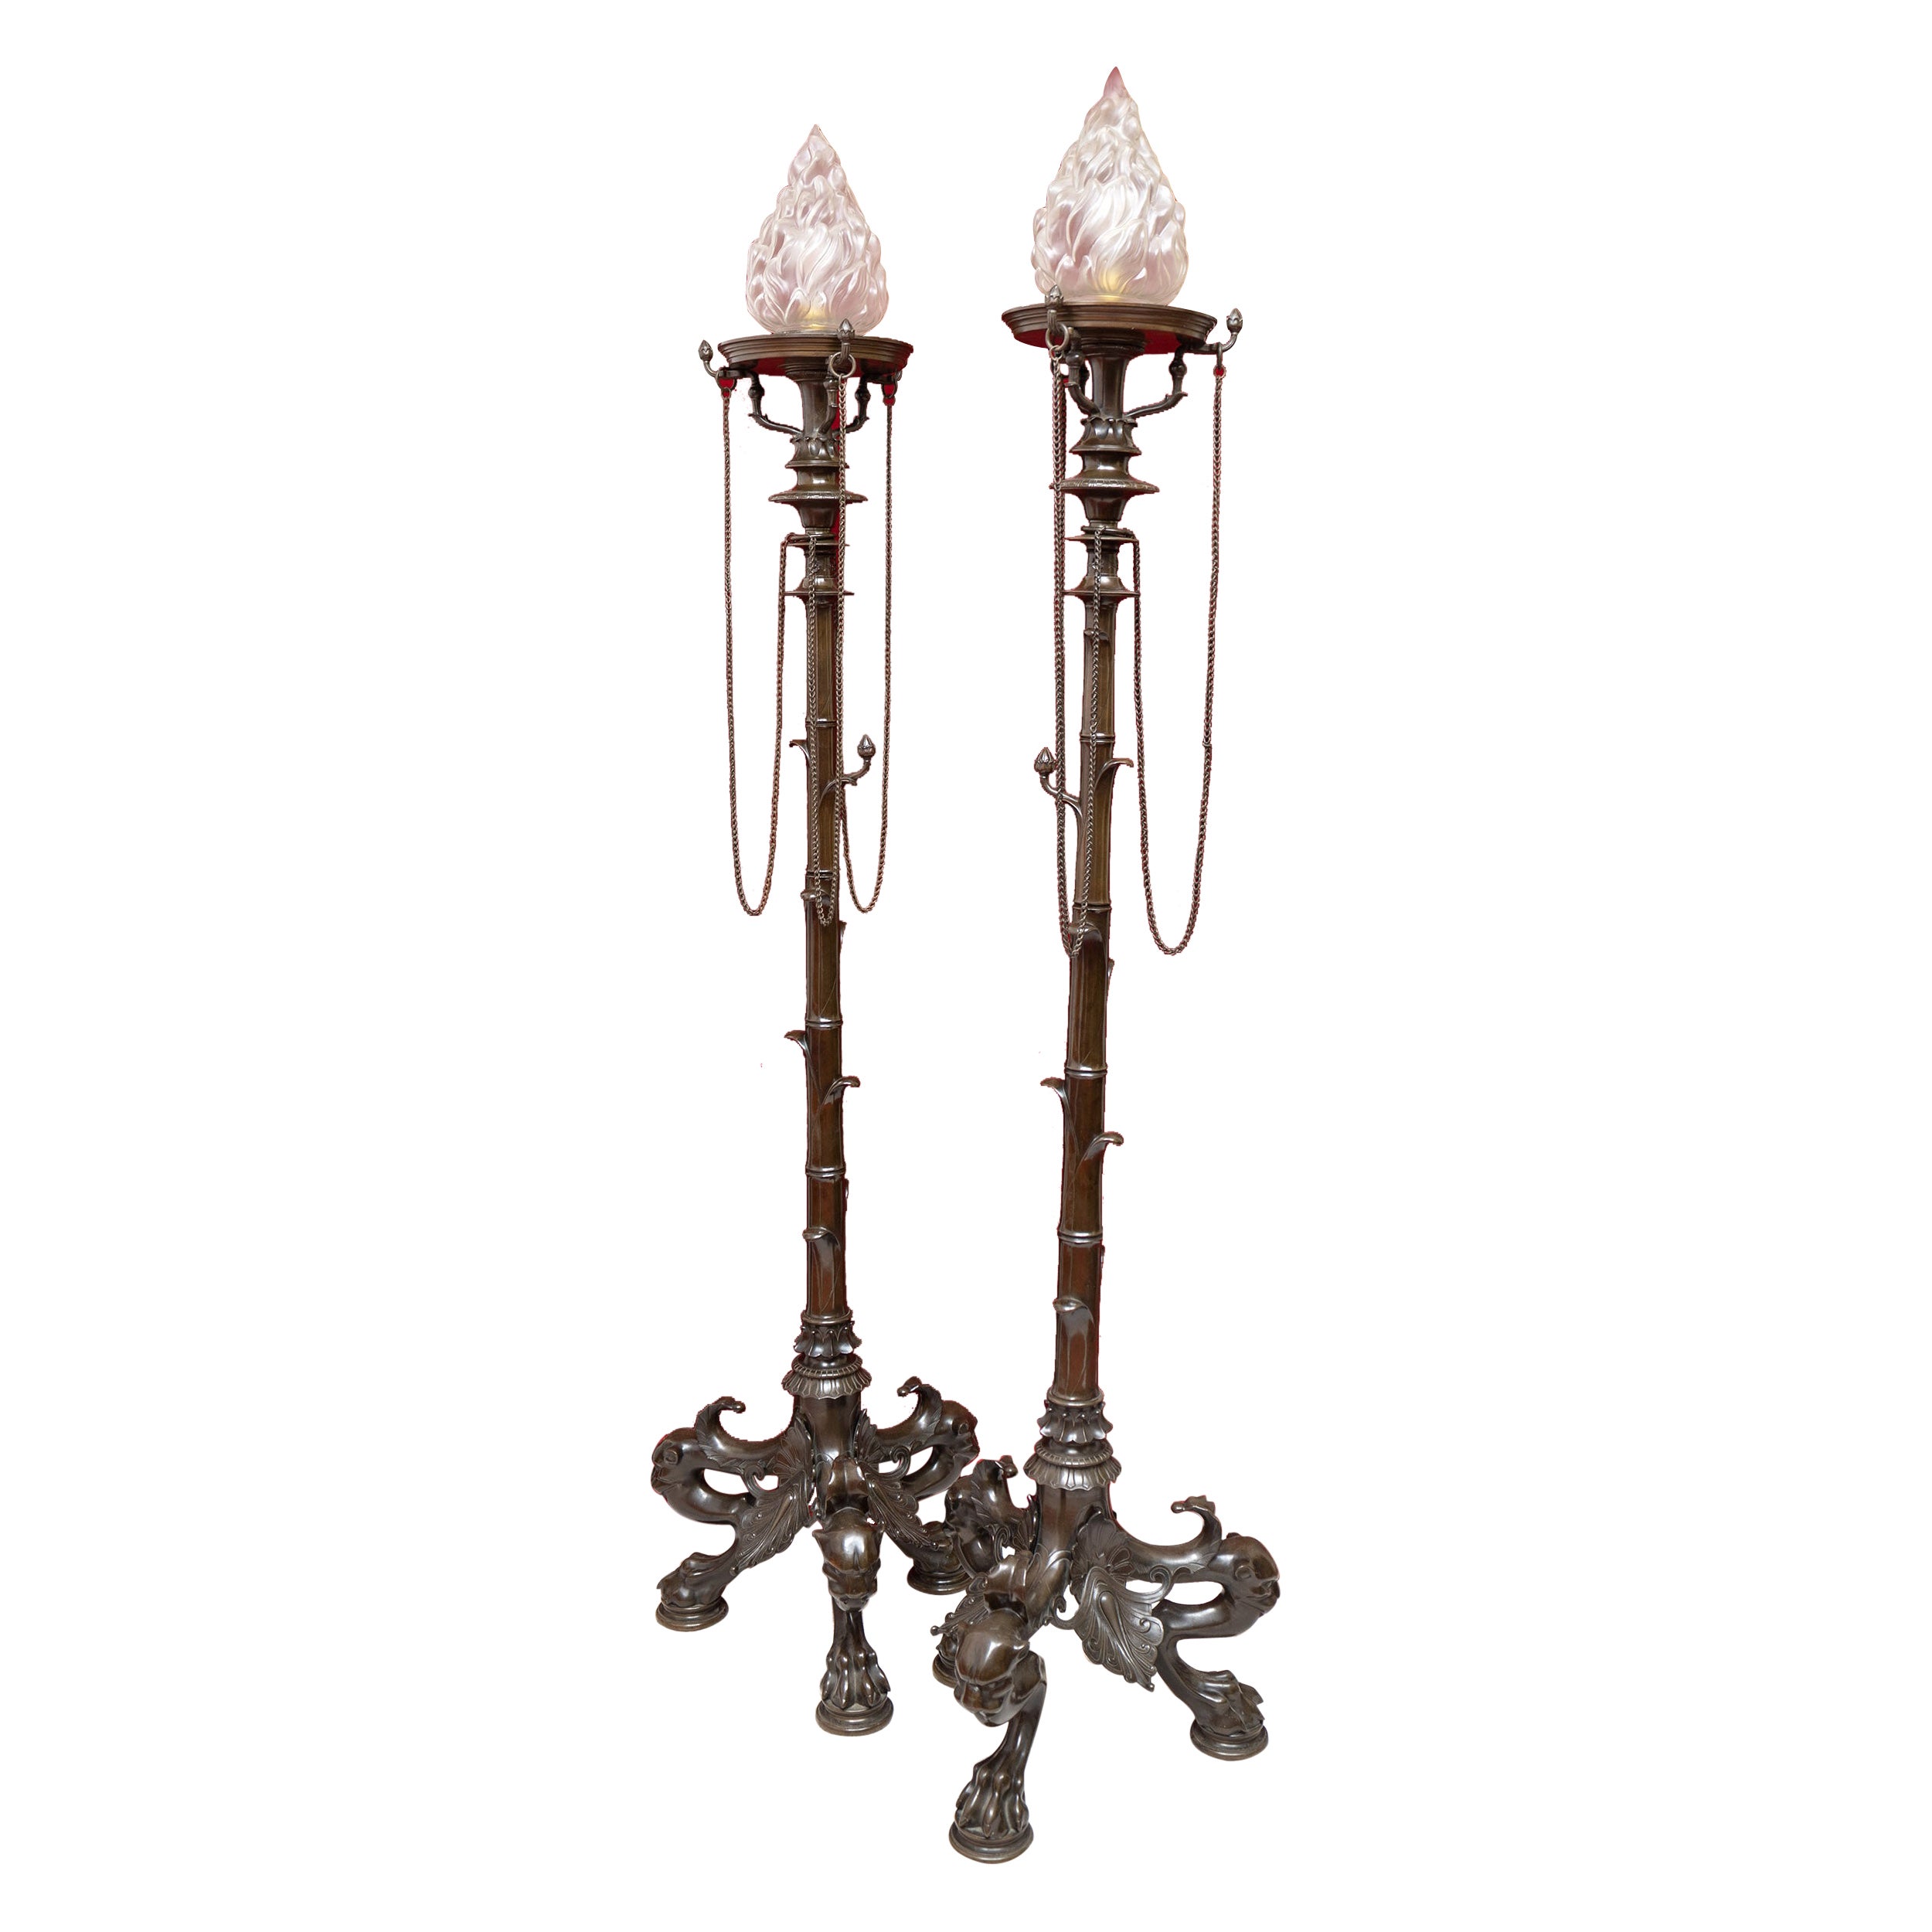 An Exquisite pair of bronze lamp stands from the 1855 Paris exhibition. For Sale